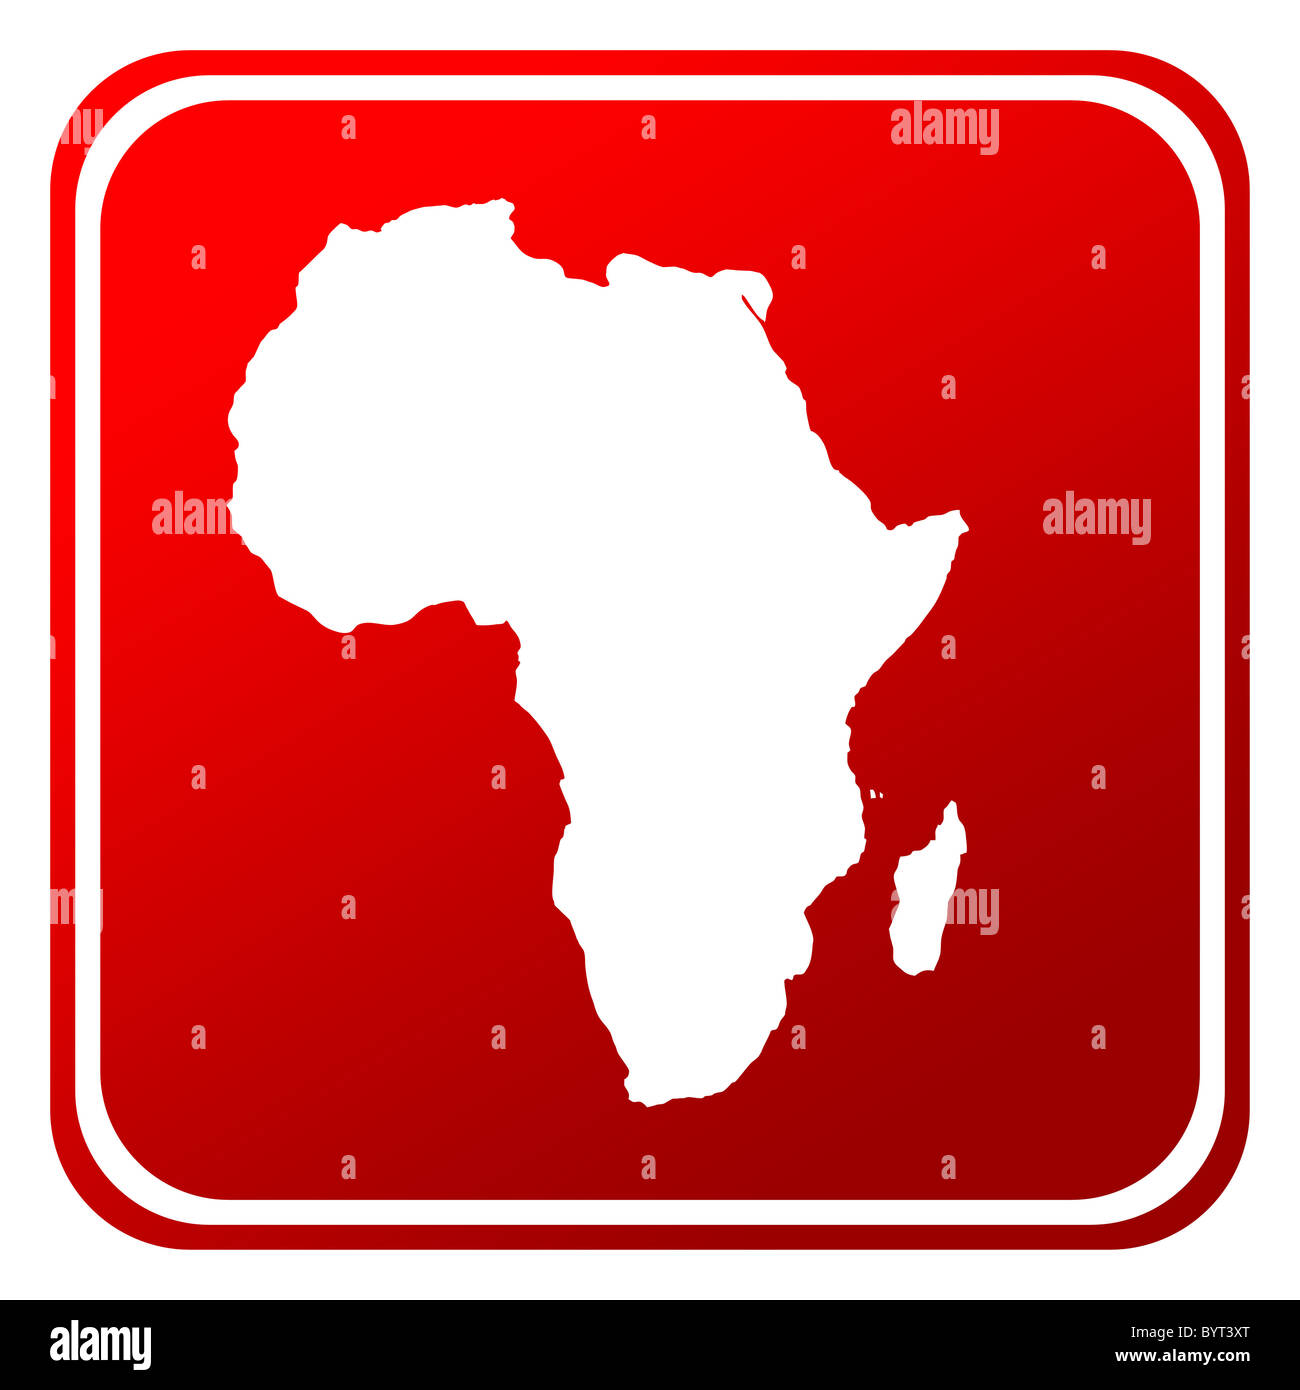 Red Africa map button isolated on white background. Stock Photo